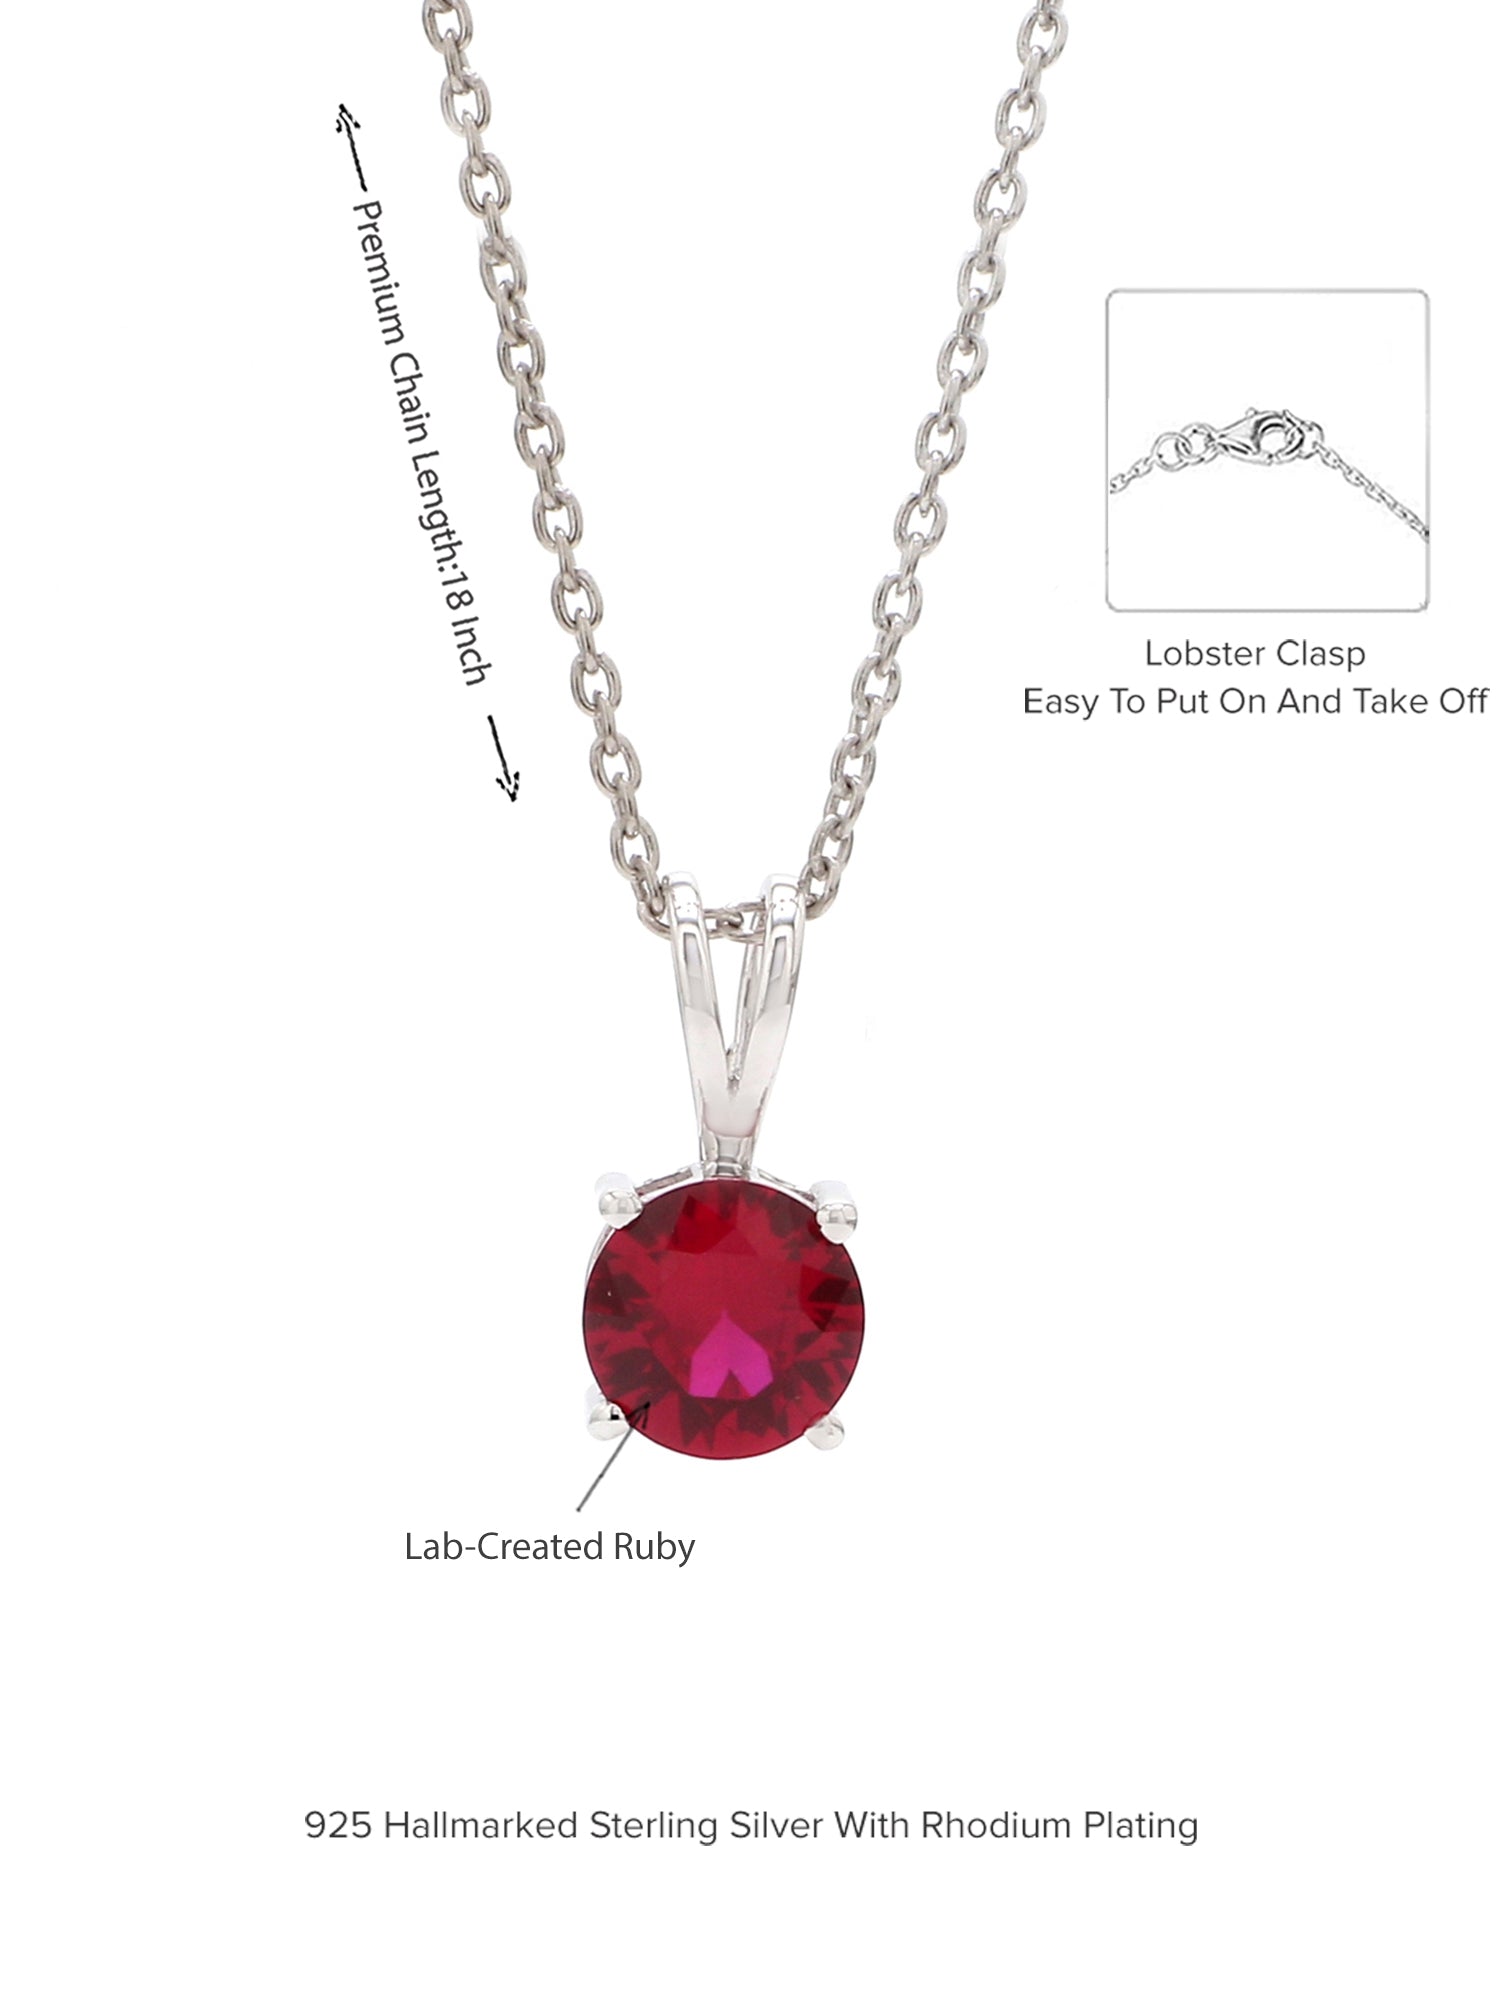 DAILY WEAR RUBY SOLITAIRE PENDANT